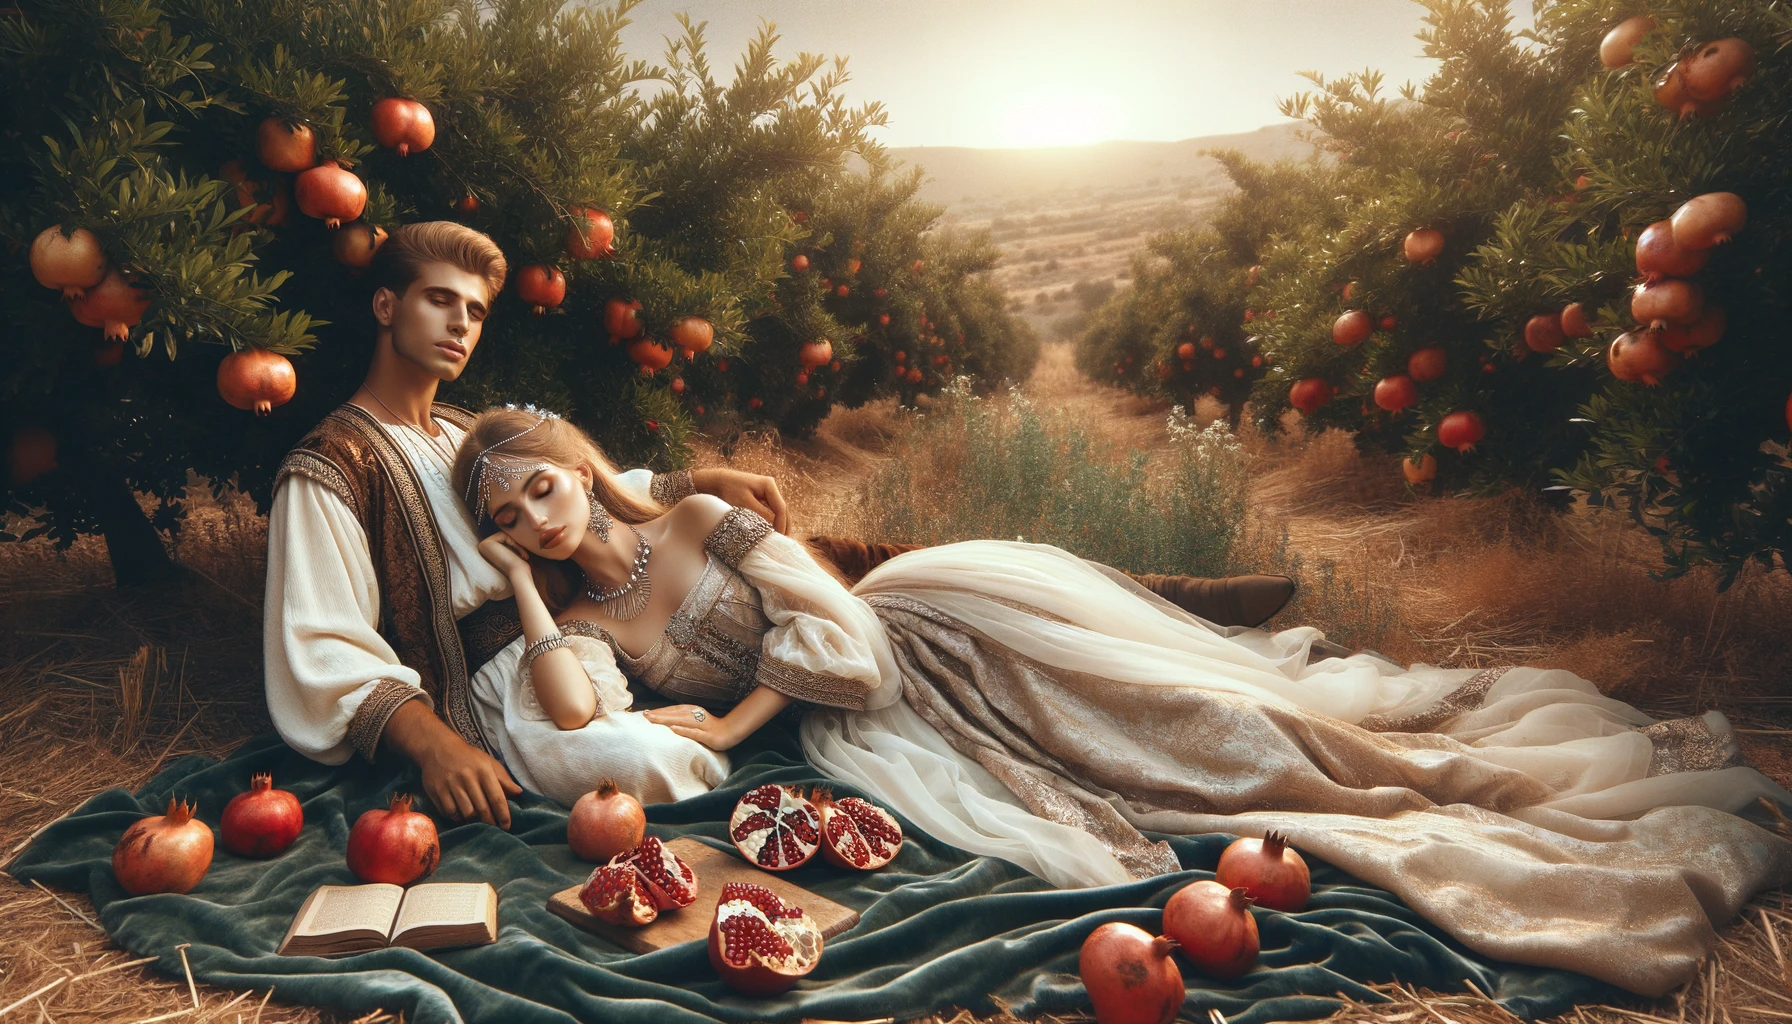 Ark.au Illustrated Bible - Song of Solomon 7:12 - Let us go out early to the vine-gardens; let us see if the vine is in bud, if it has put out its young fruit, and the pomegranate is in flower. There I will give you my love.